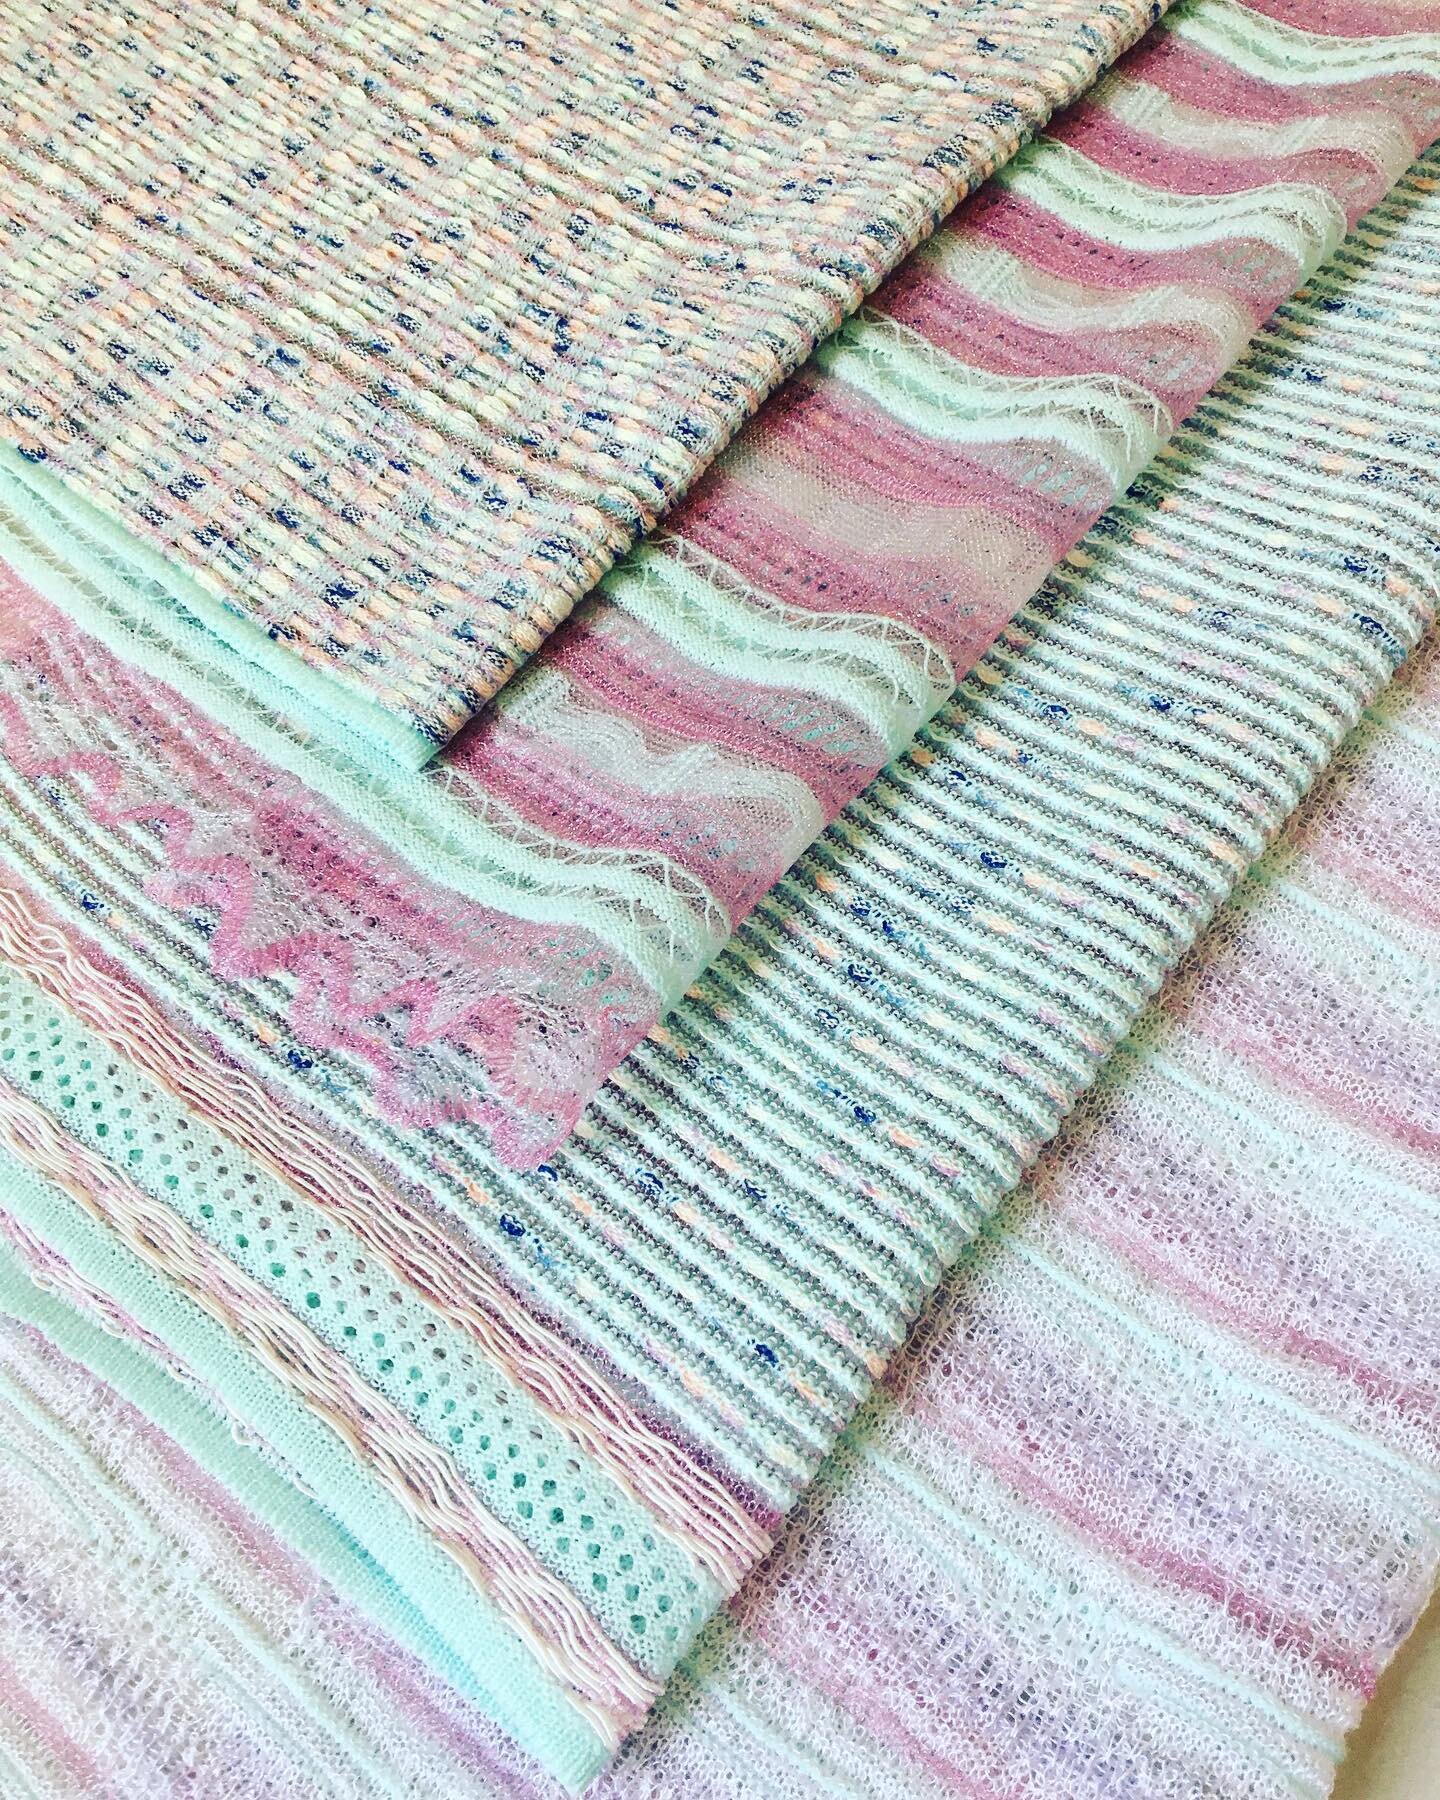 Candy stitches 🍬 
Made by MRC

#knitwear
#shimaseiki
#mrcknitwear
#fabric
#madeinItaly
#innovation
#textiles
#technicaltextiles
#fashion
#maglieria
#maille